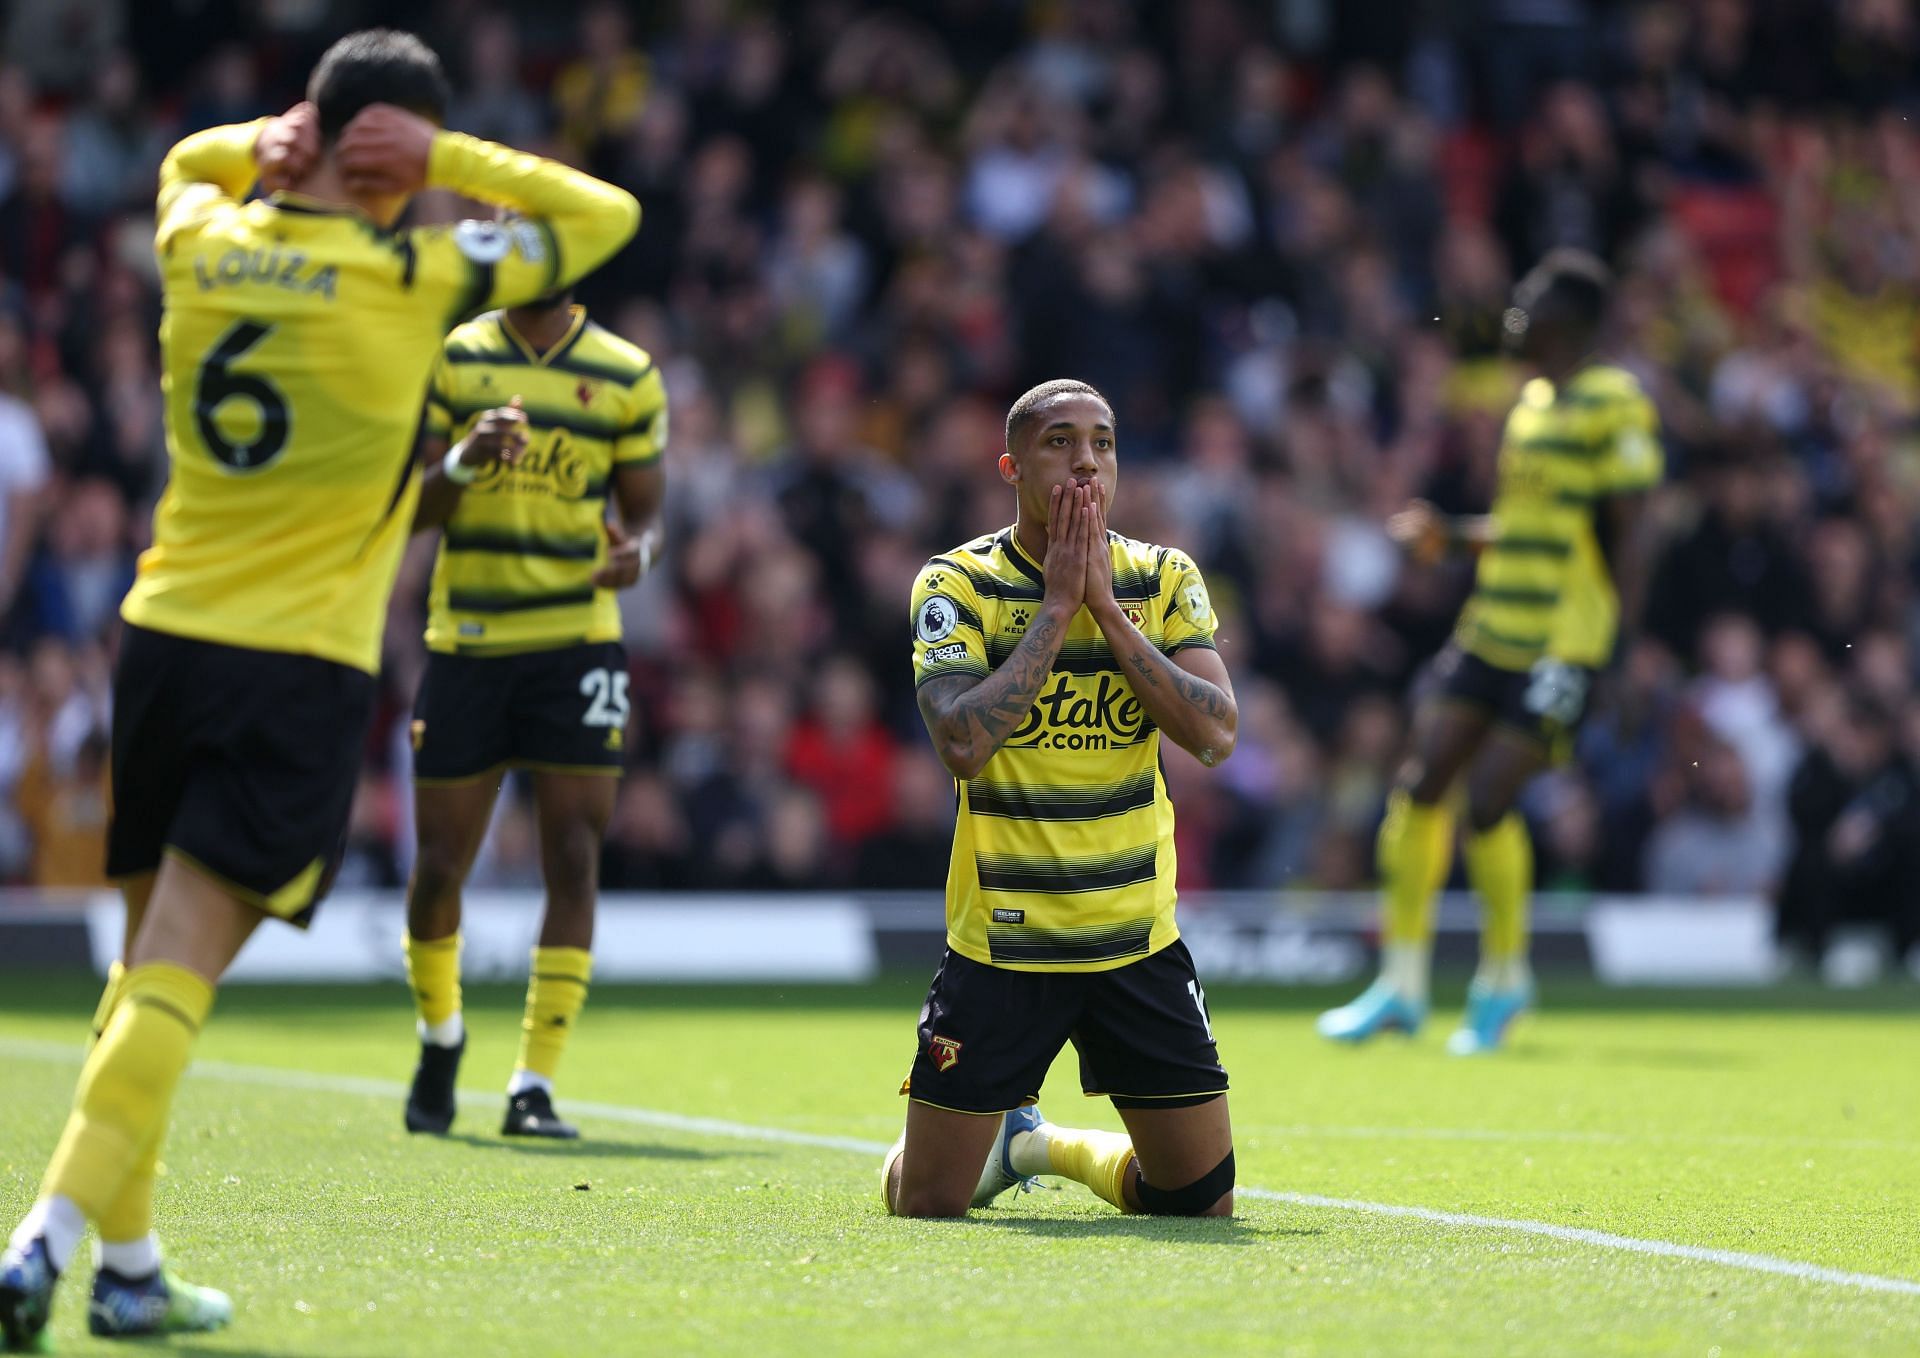 Watford have been relegated back to the EFL Championship